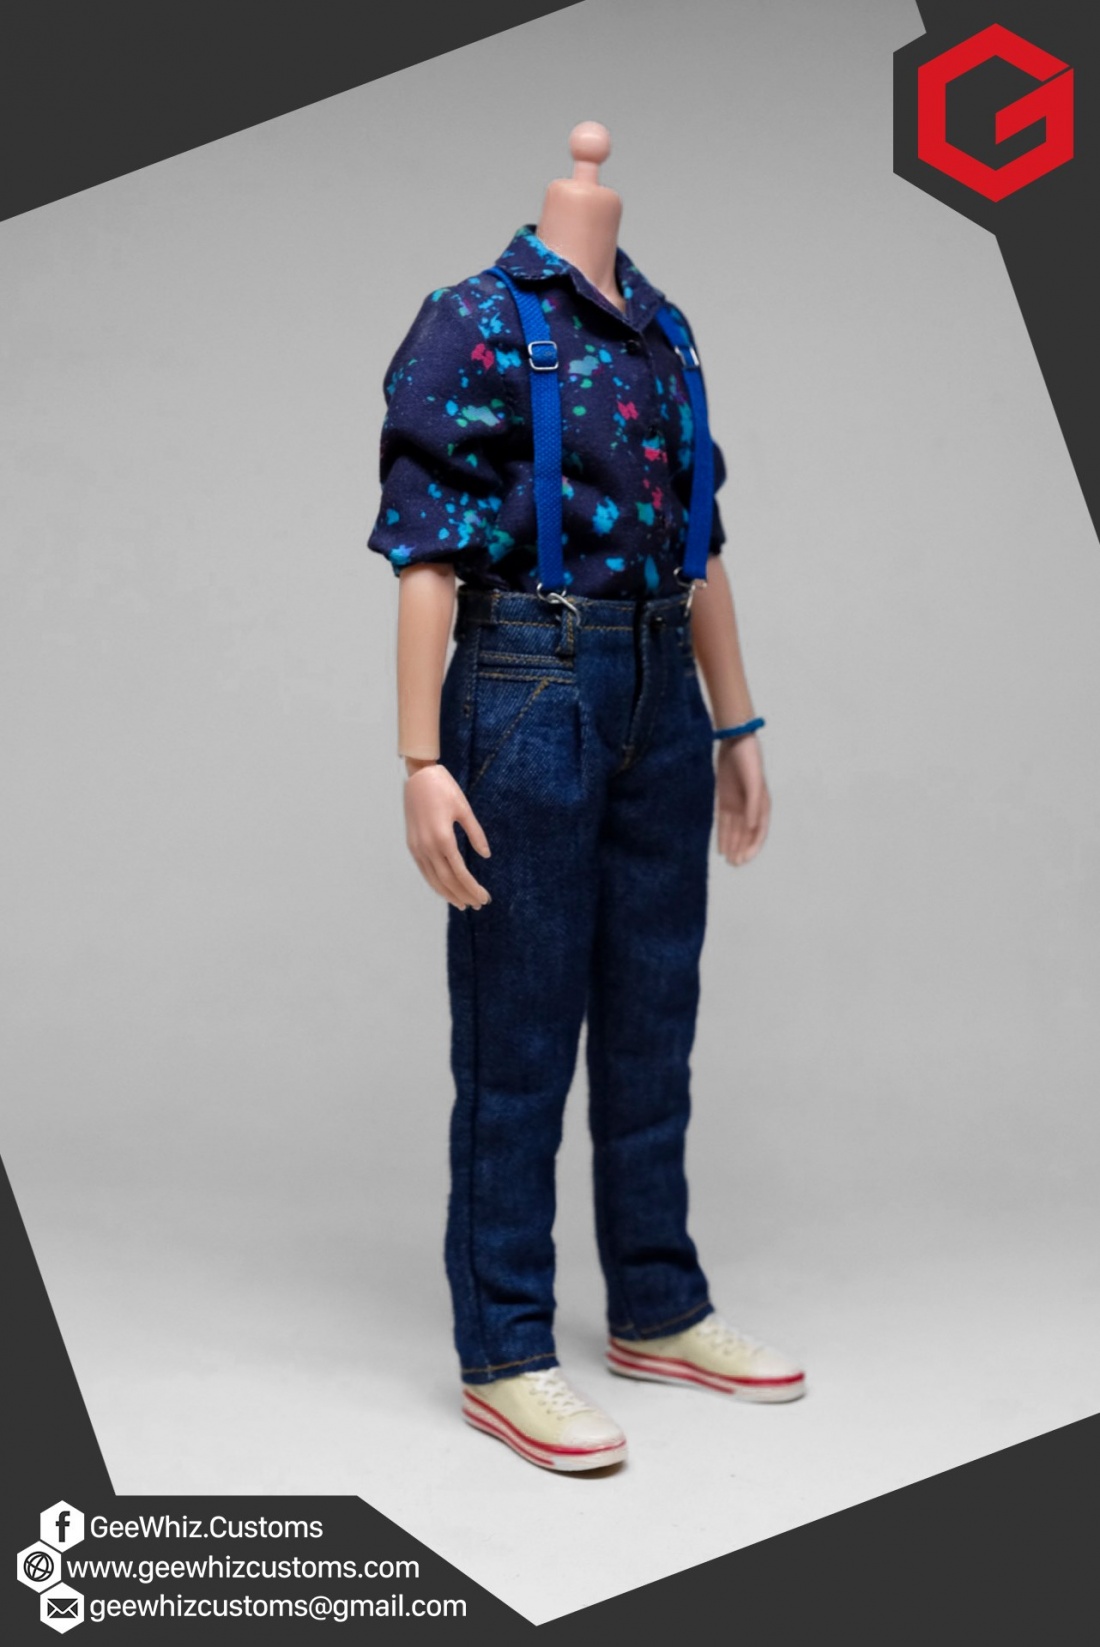 Geewhiz Customs: Eleven (Stranger Things Season 3) 1:6 Scale Outfit